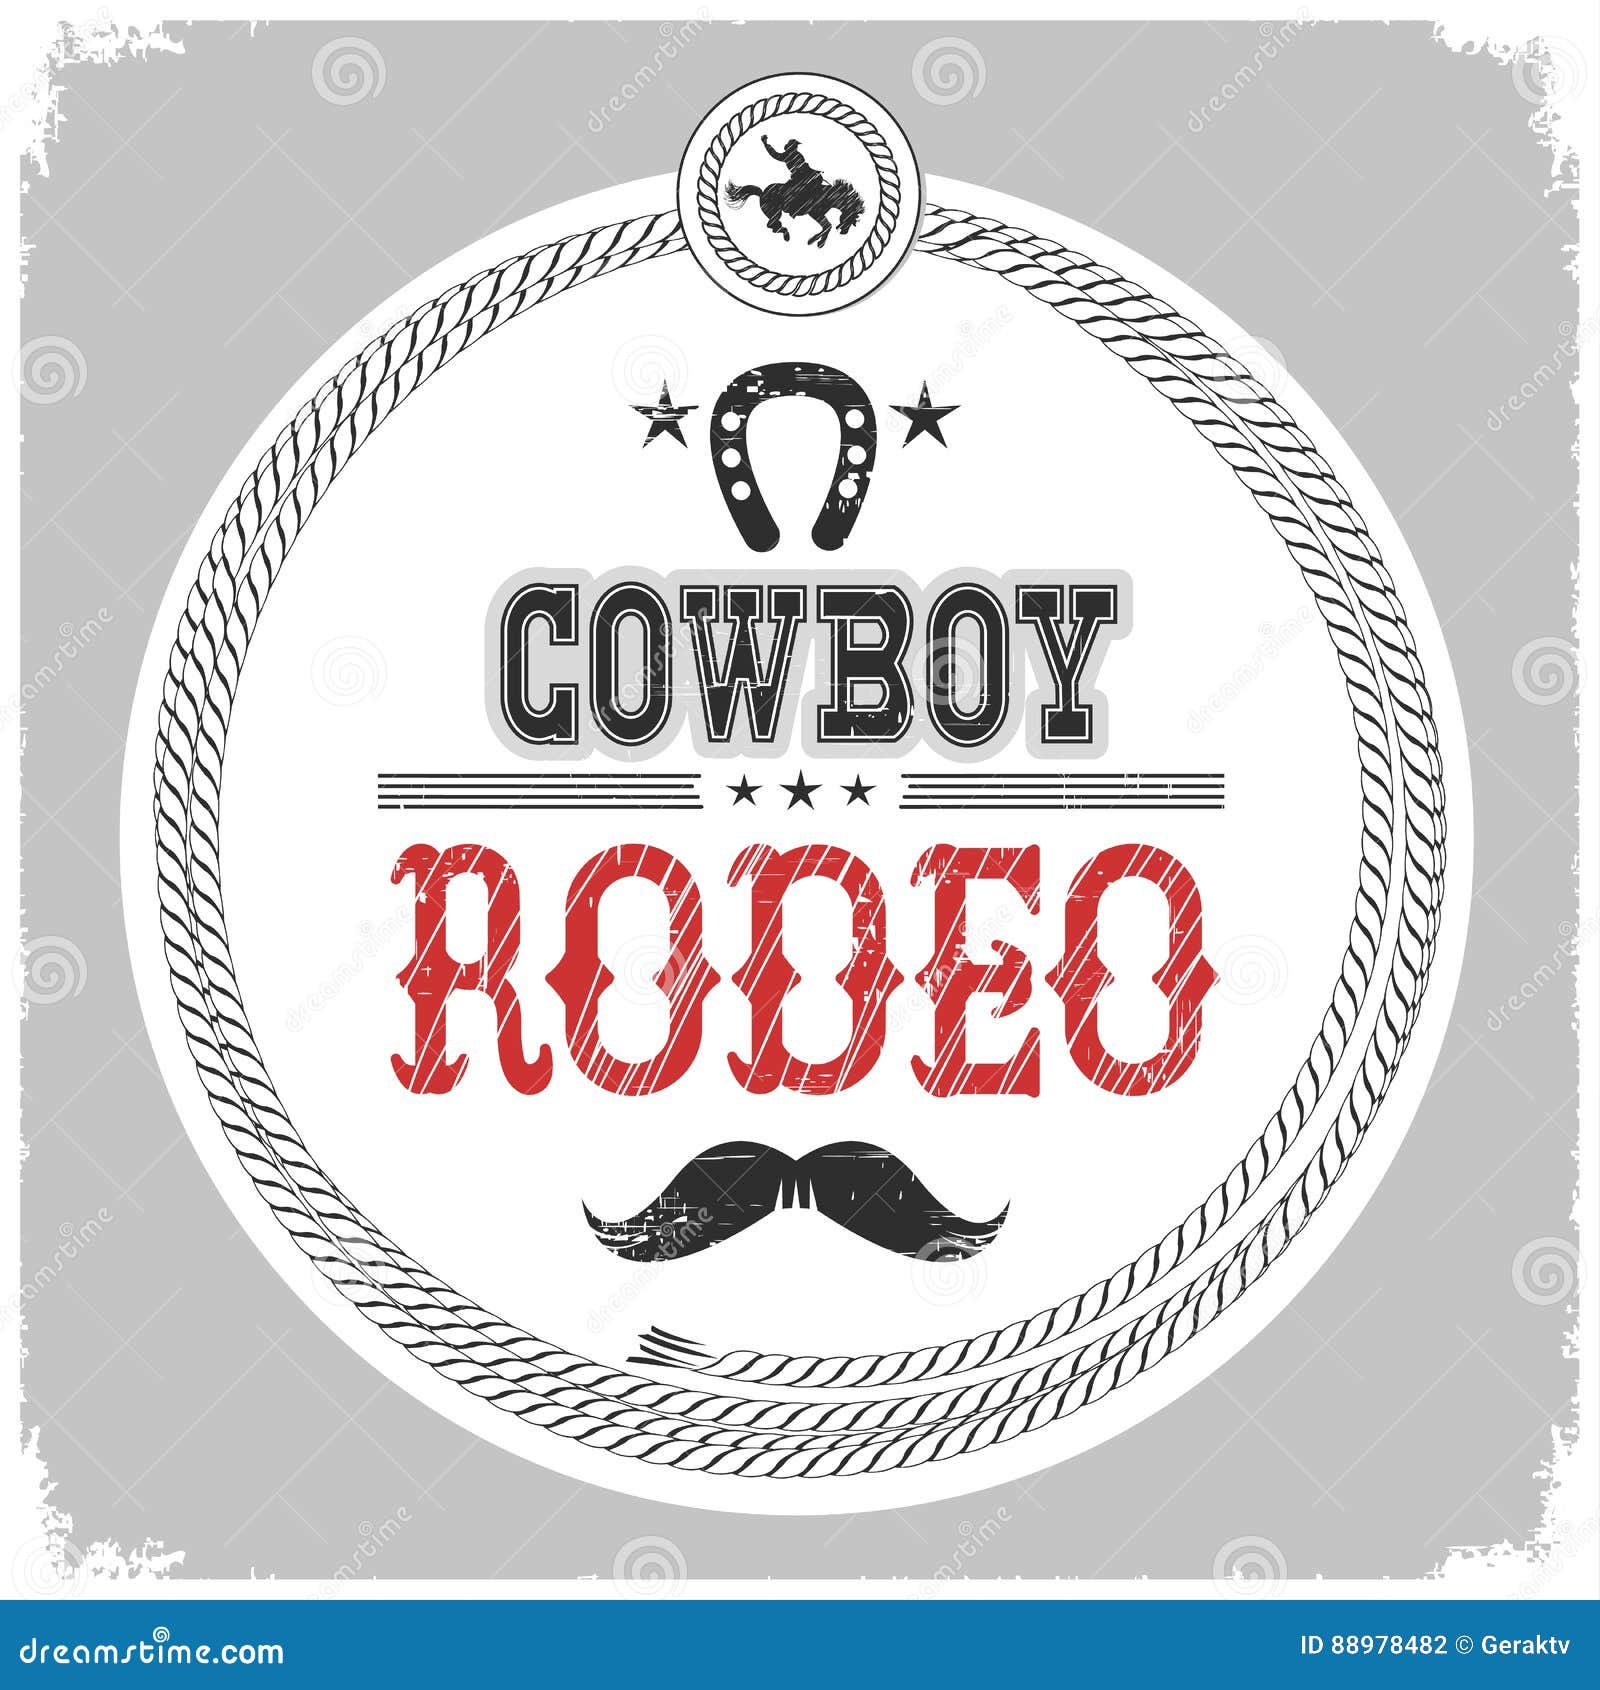 cowboy rodeo label with cowboy decotarion  on white.